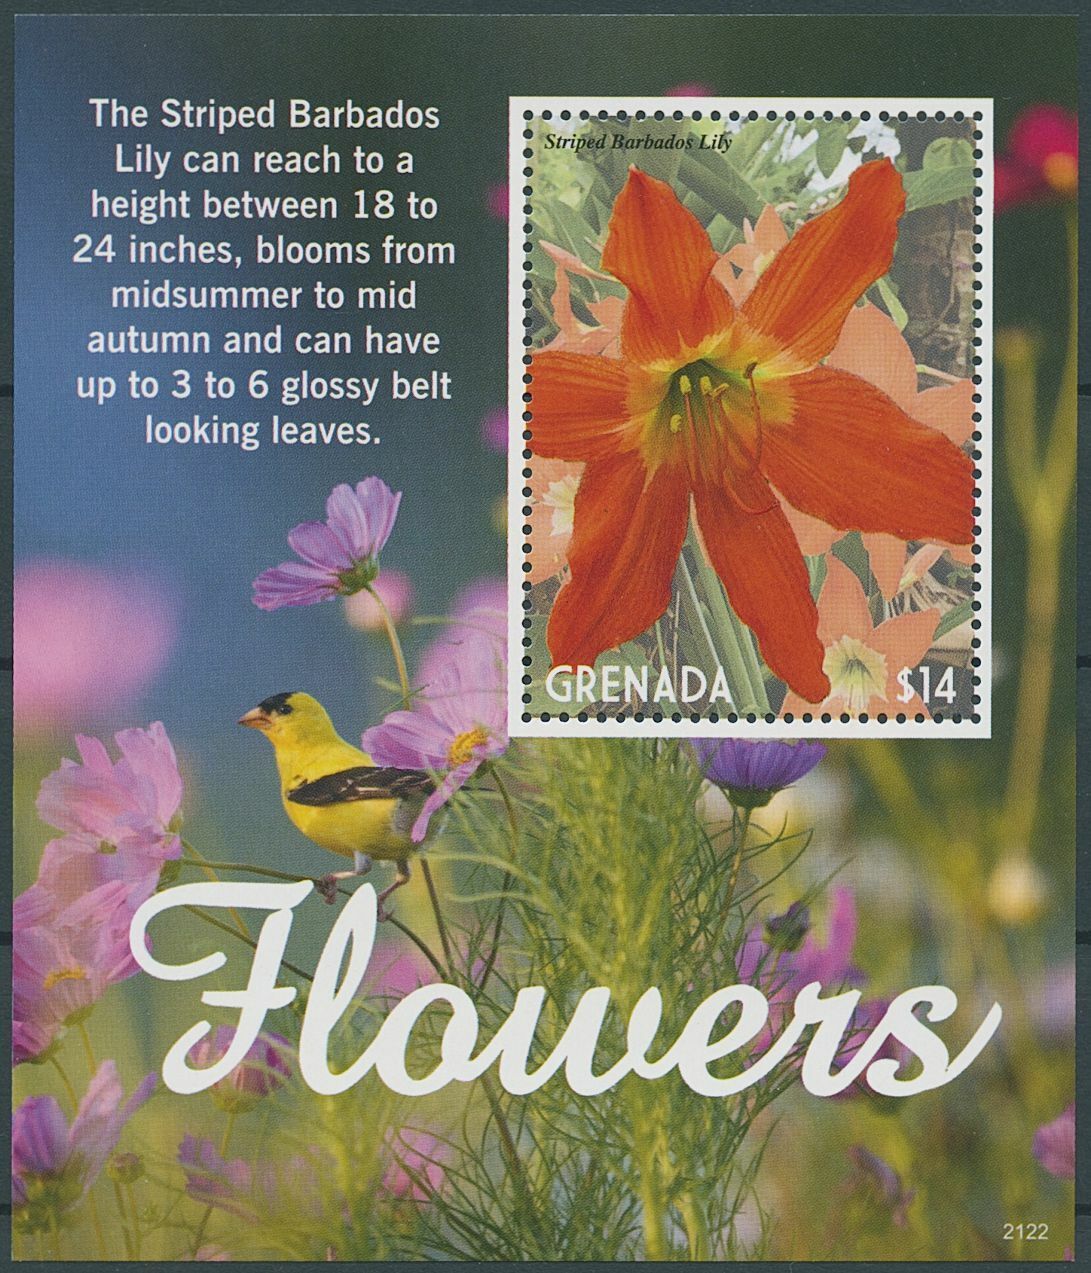 Grenada 2021 MNH Flowers Stamps Striped Barbados Lily Lilies 1v S/S